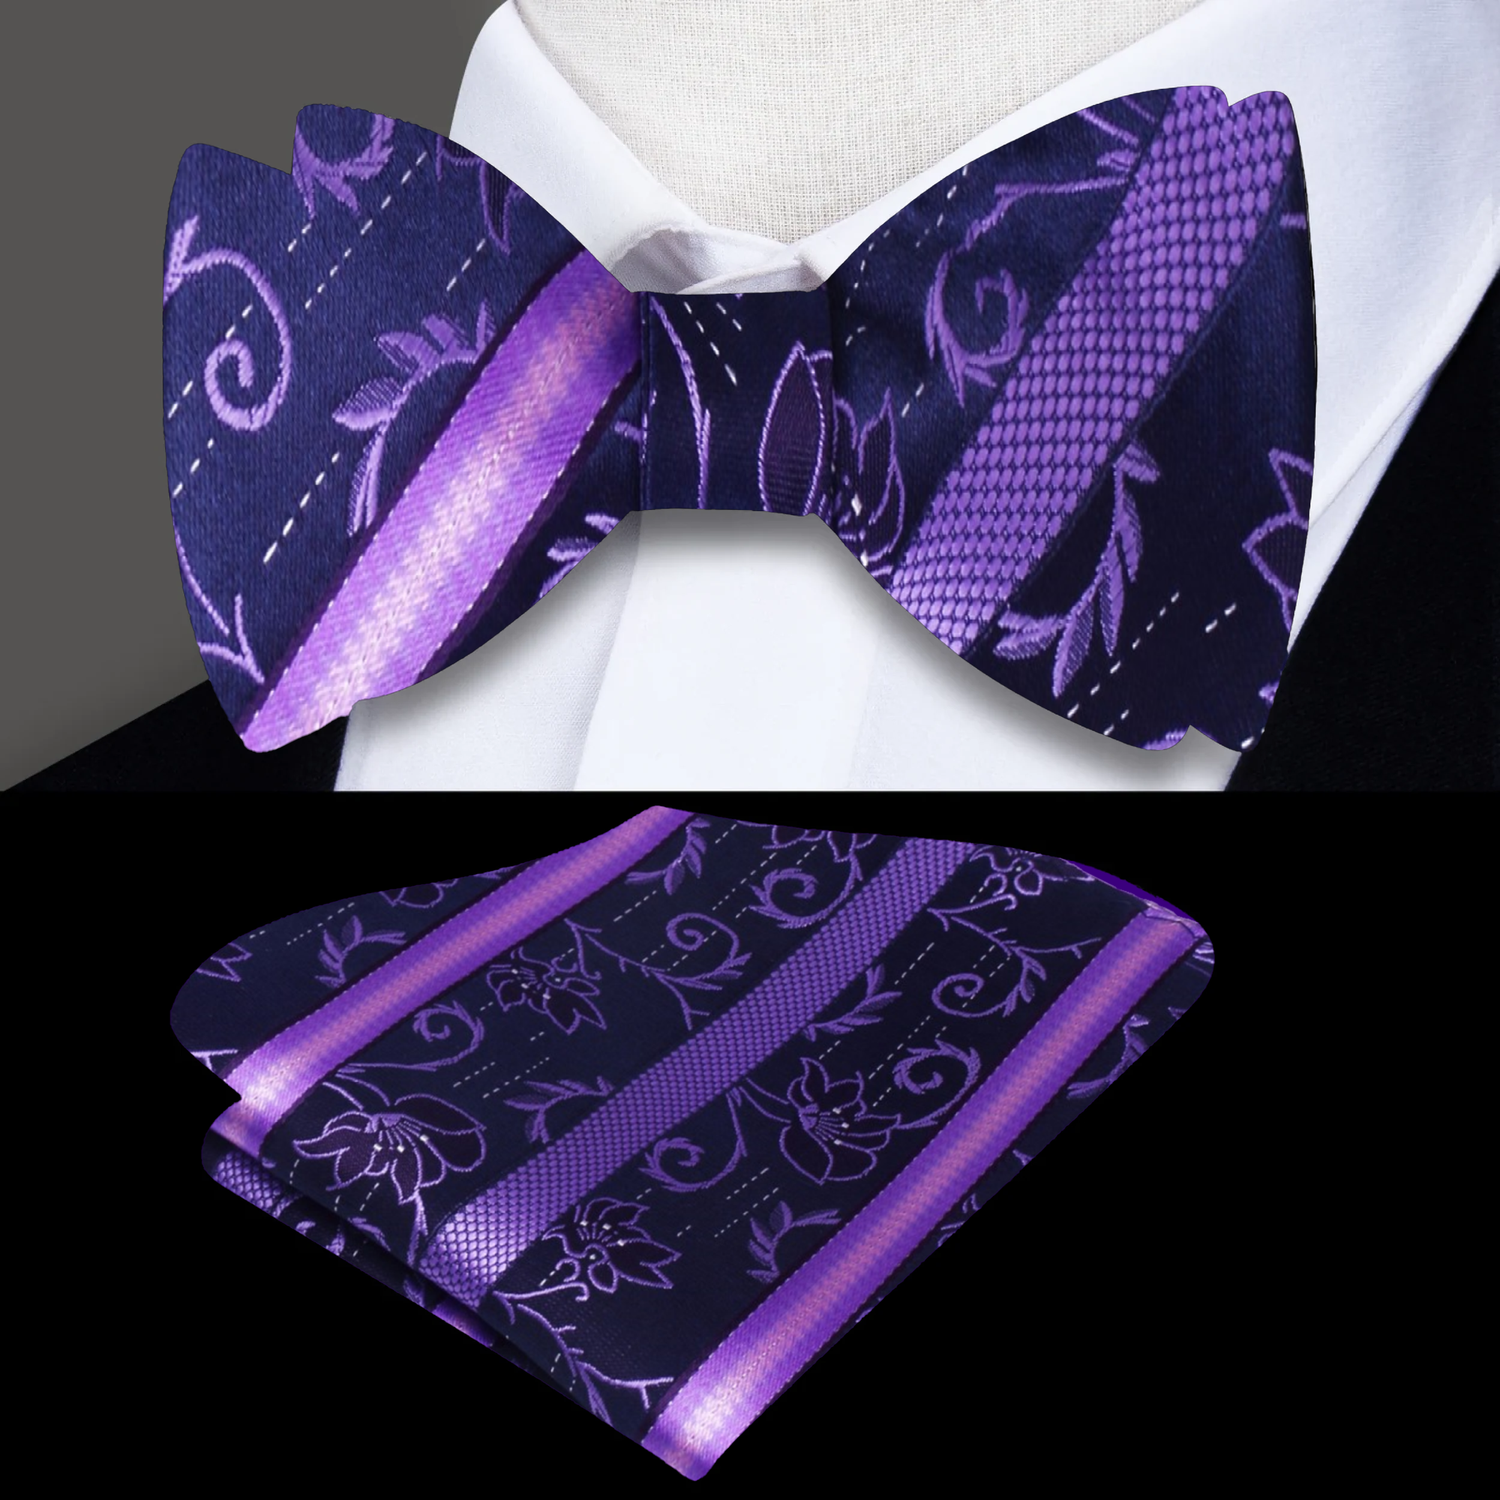 Main View: Purple Floral Bow Tie on Black Suit with Matching Pocket Square